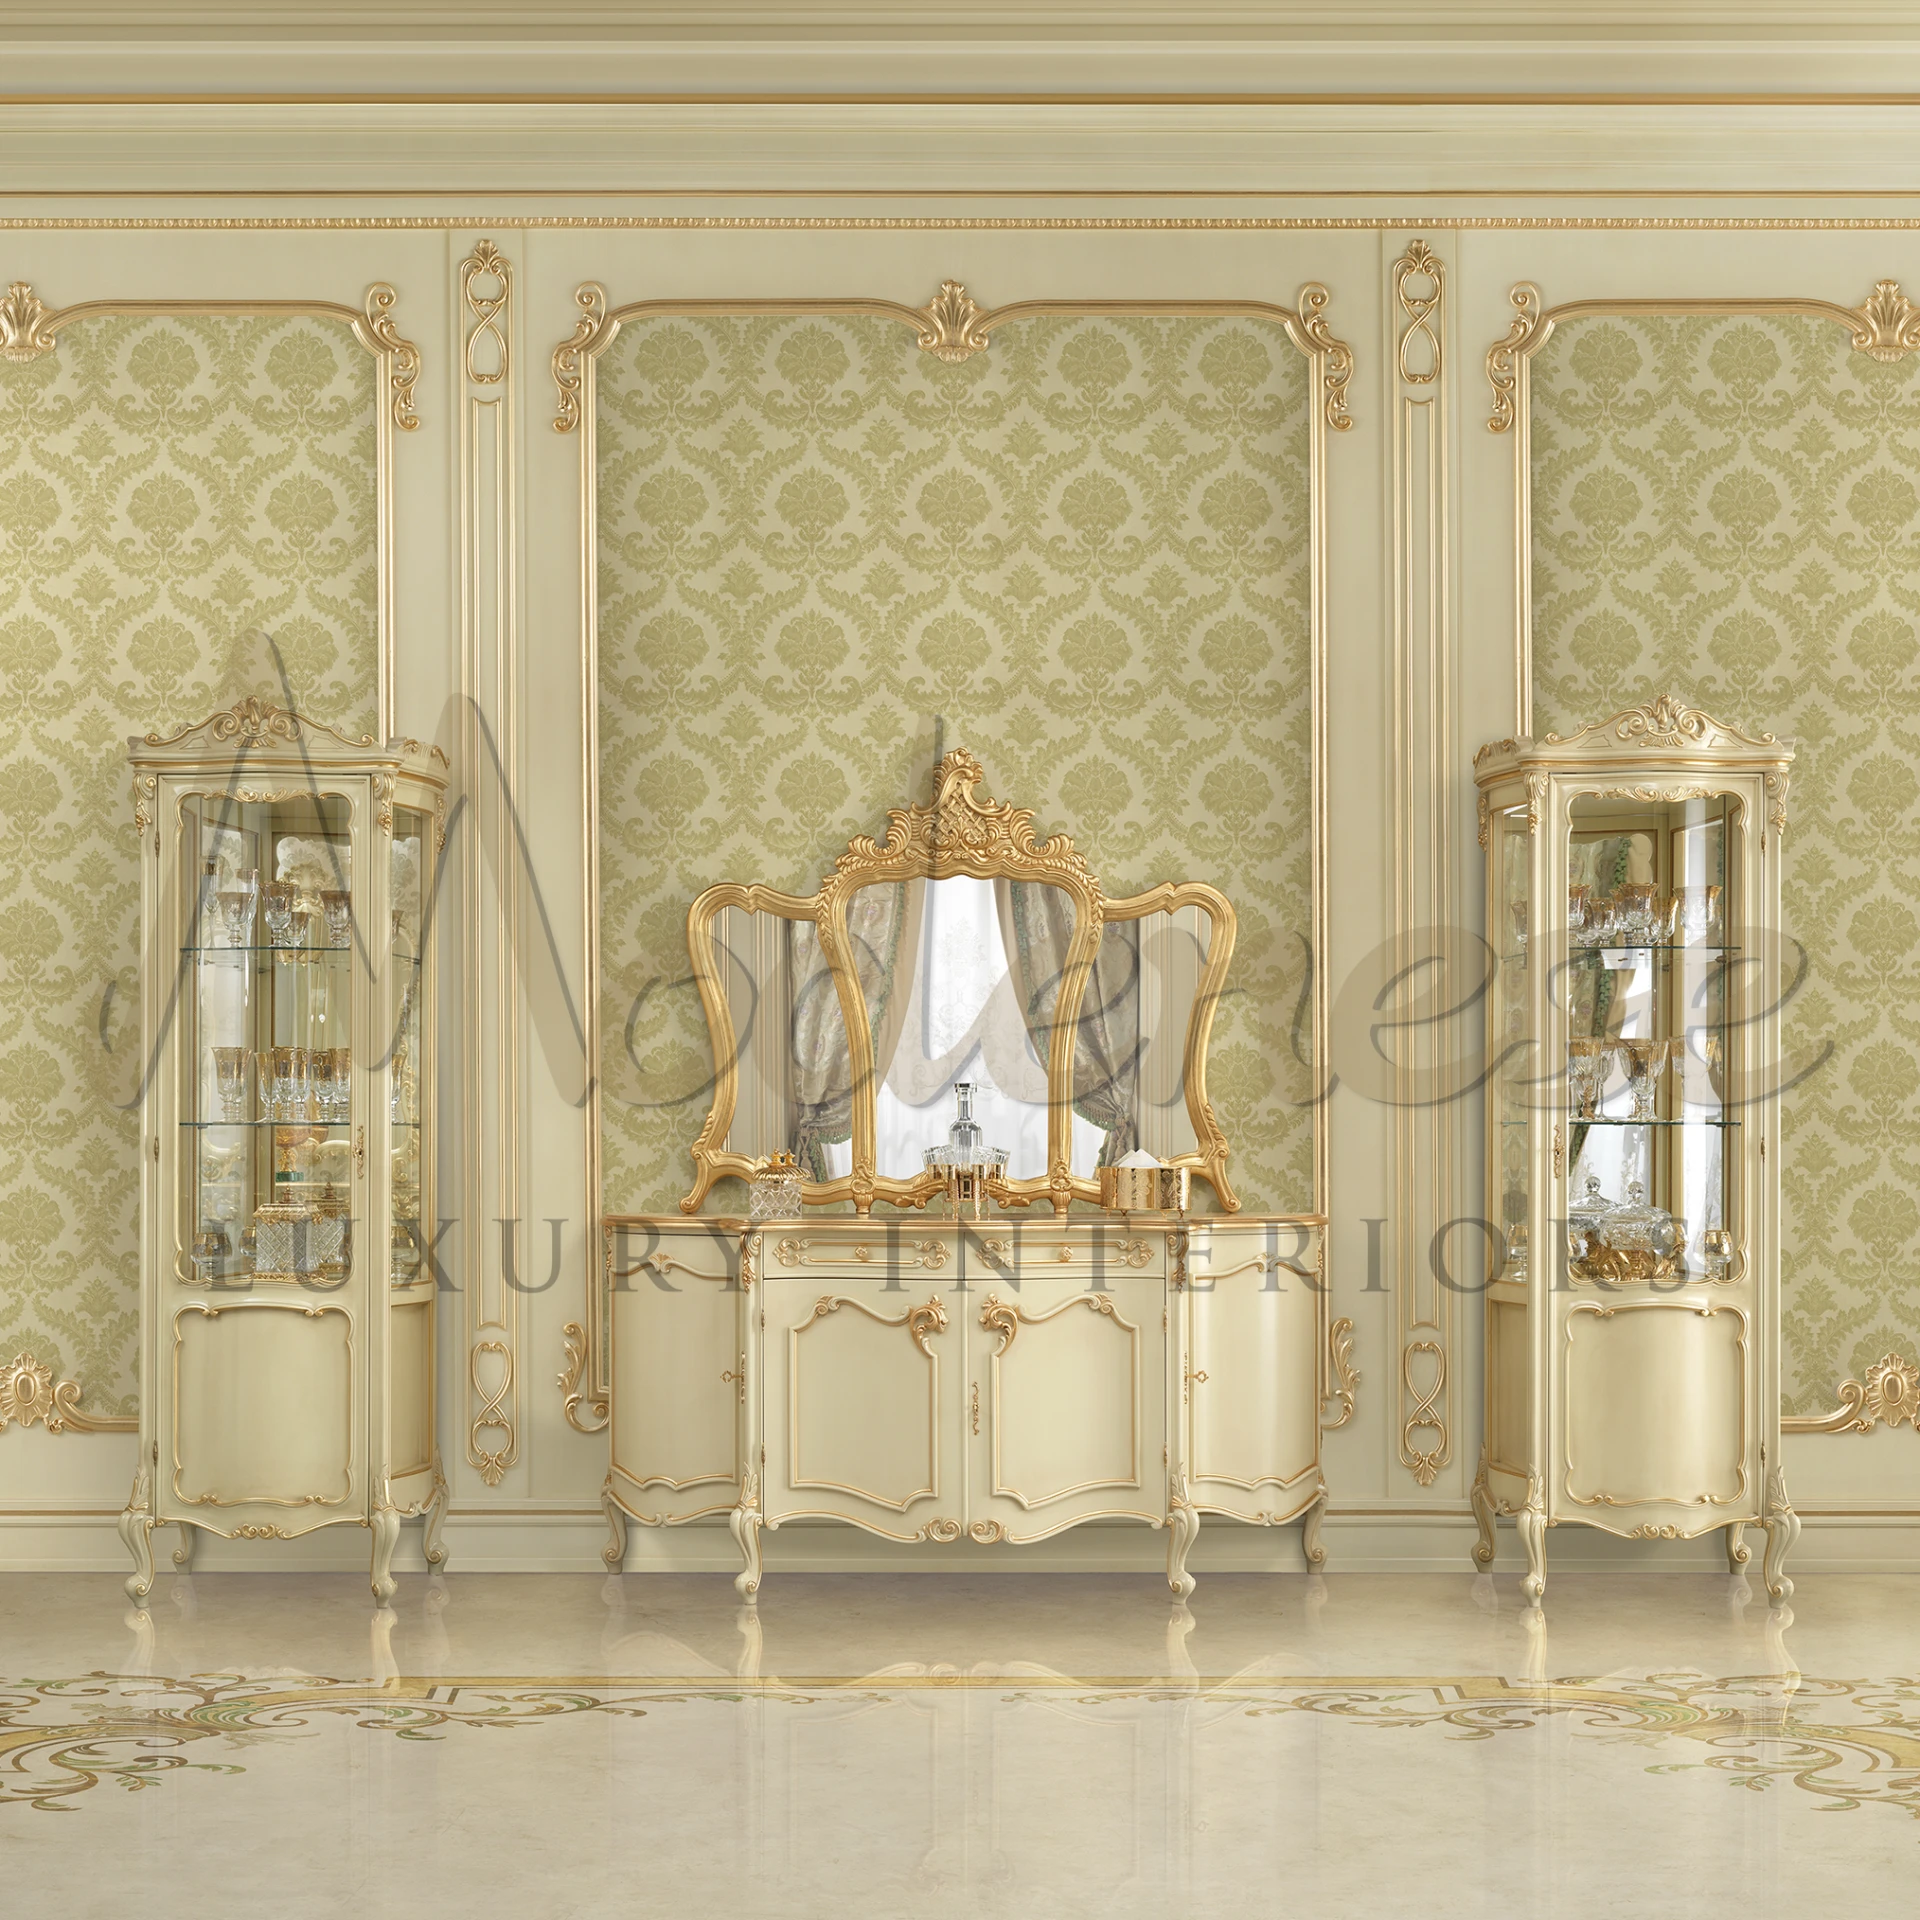 A fancy dressing table with a big mirror, sitting between two glass cabinets with gold details.